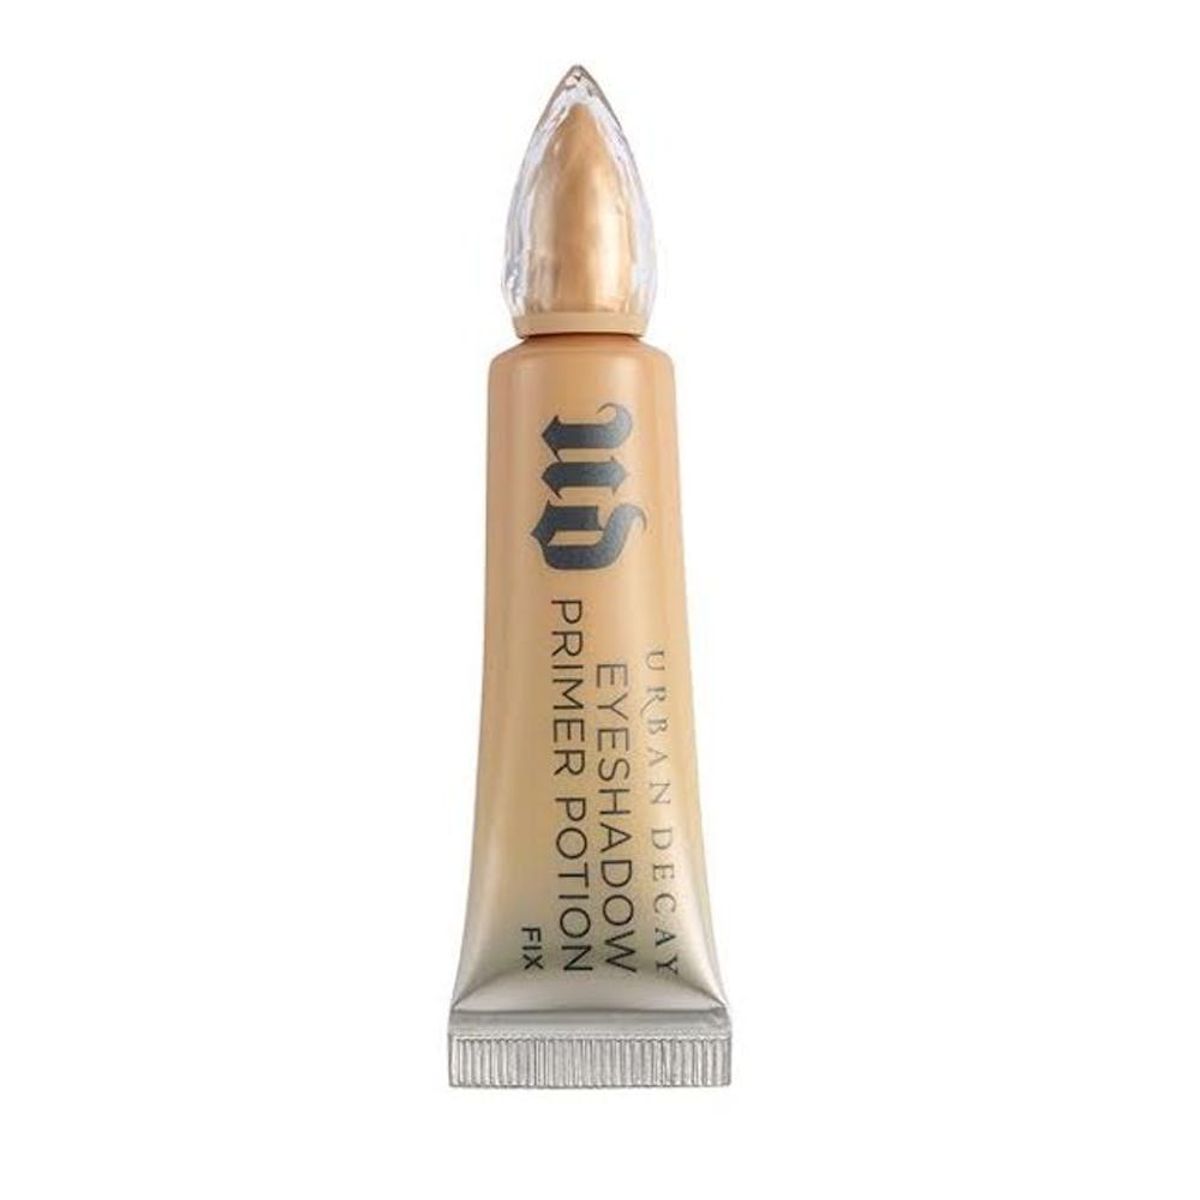 How Urban Decay’s Newest Eye Primer Potion Helps Fight for Women’s Rights